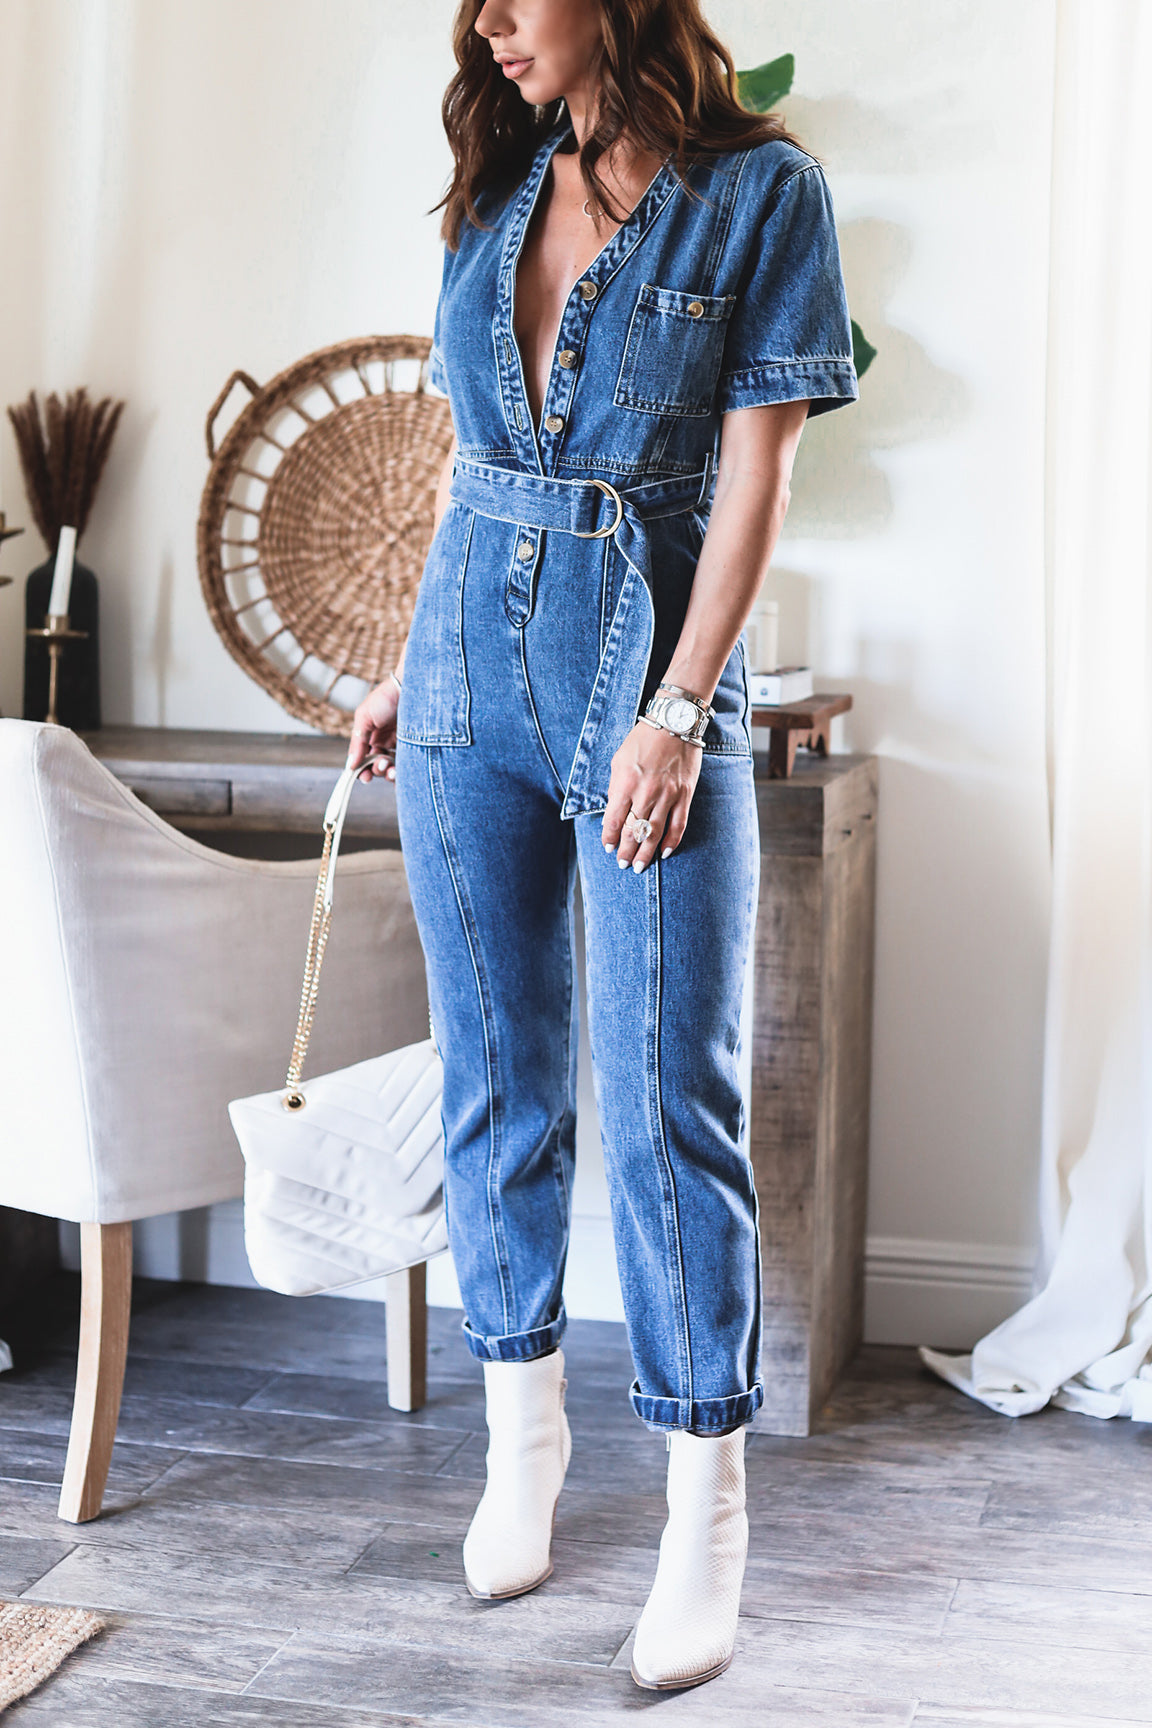 Aggregate more than 159 pics of jeans jumpsuit best